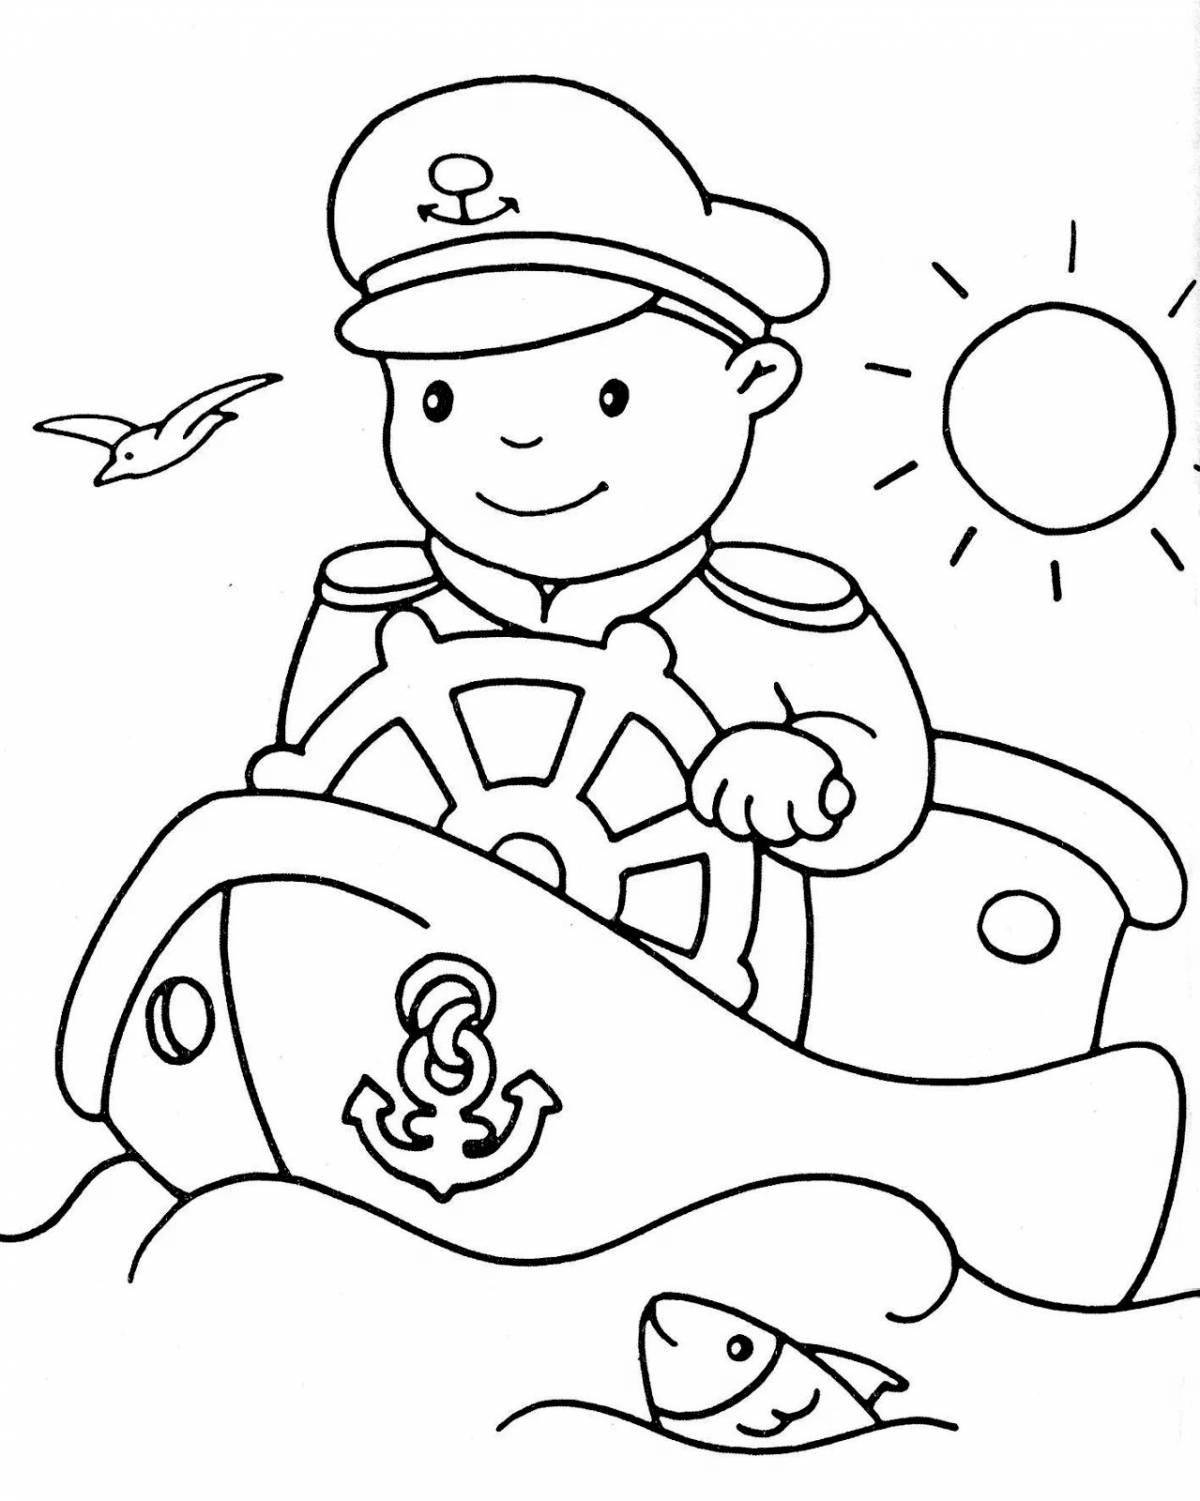 Coloring page great military uniform tanker